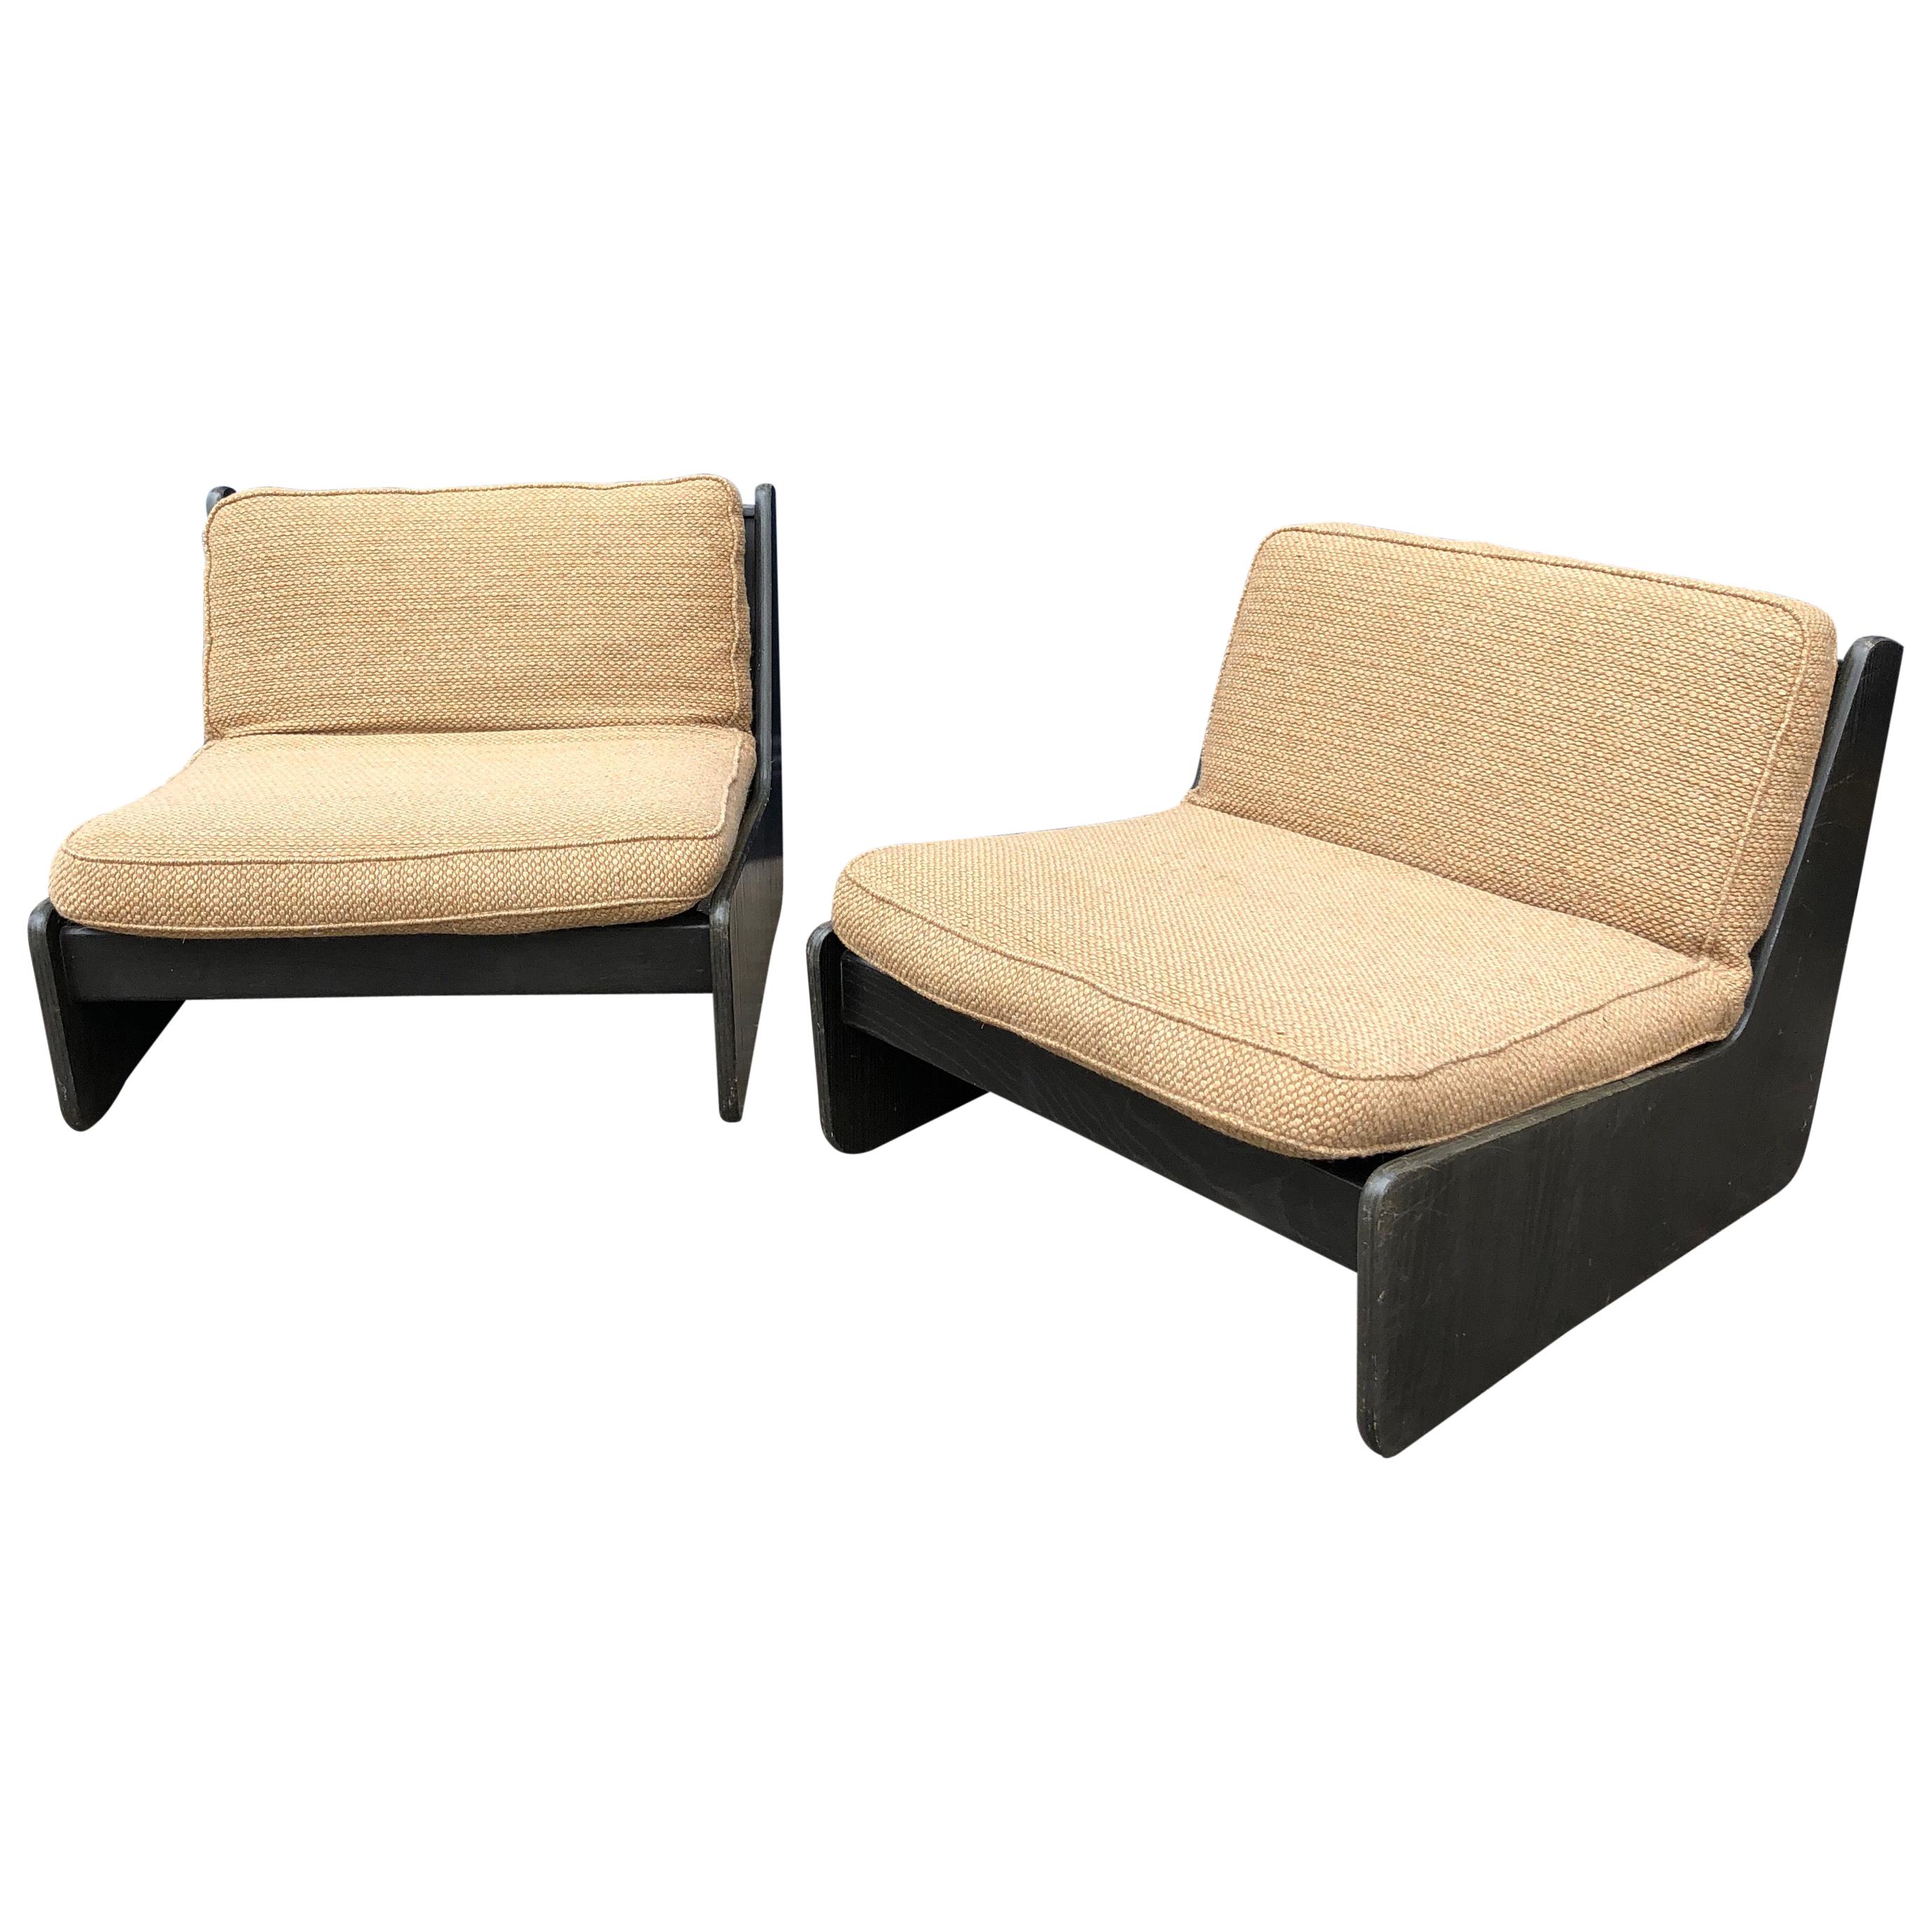 Pair of Vintage Low Seat Armchairs Modular Sofa Midcentury, 1960s For Sale